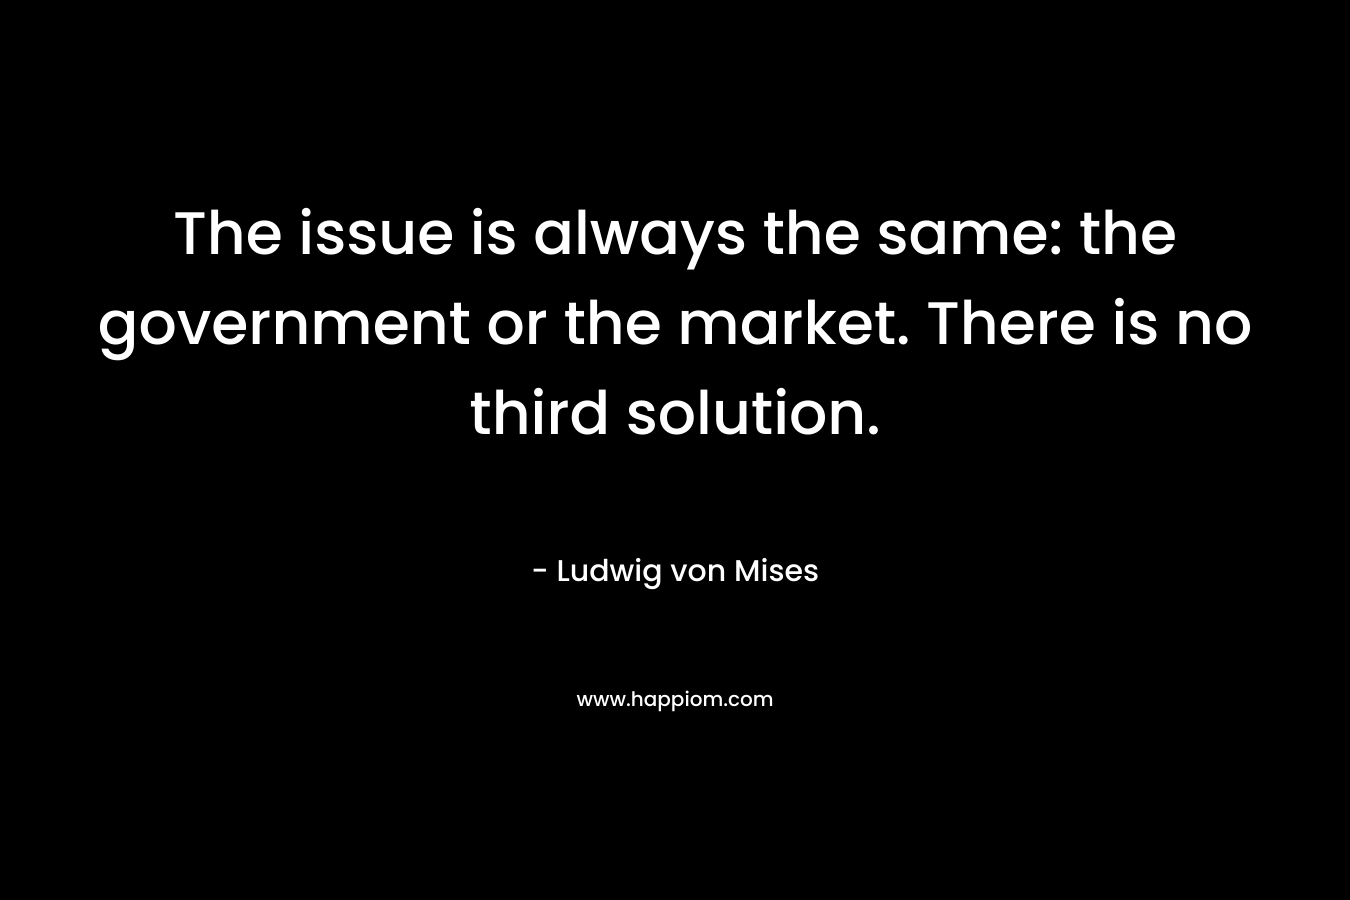 The issue is always the same: the government or the market. There is no third solution.